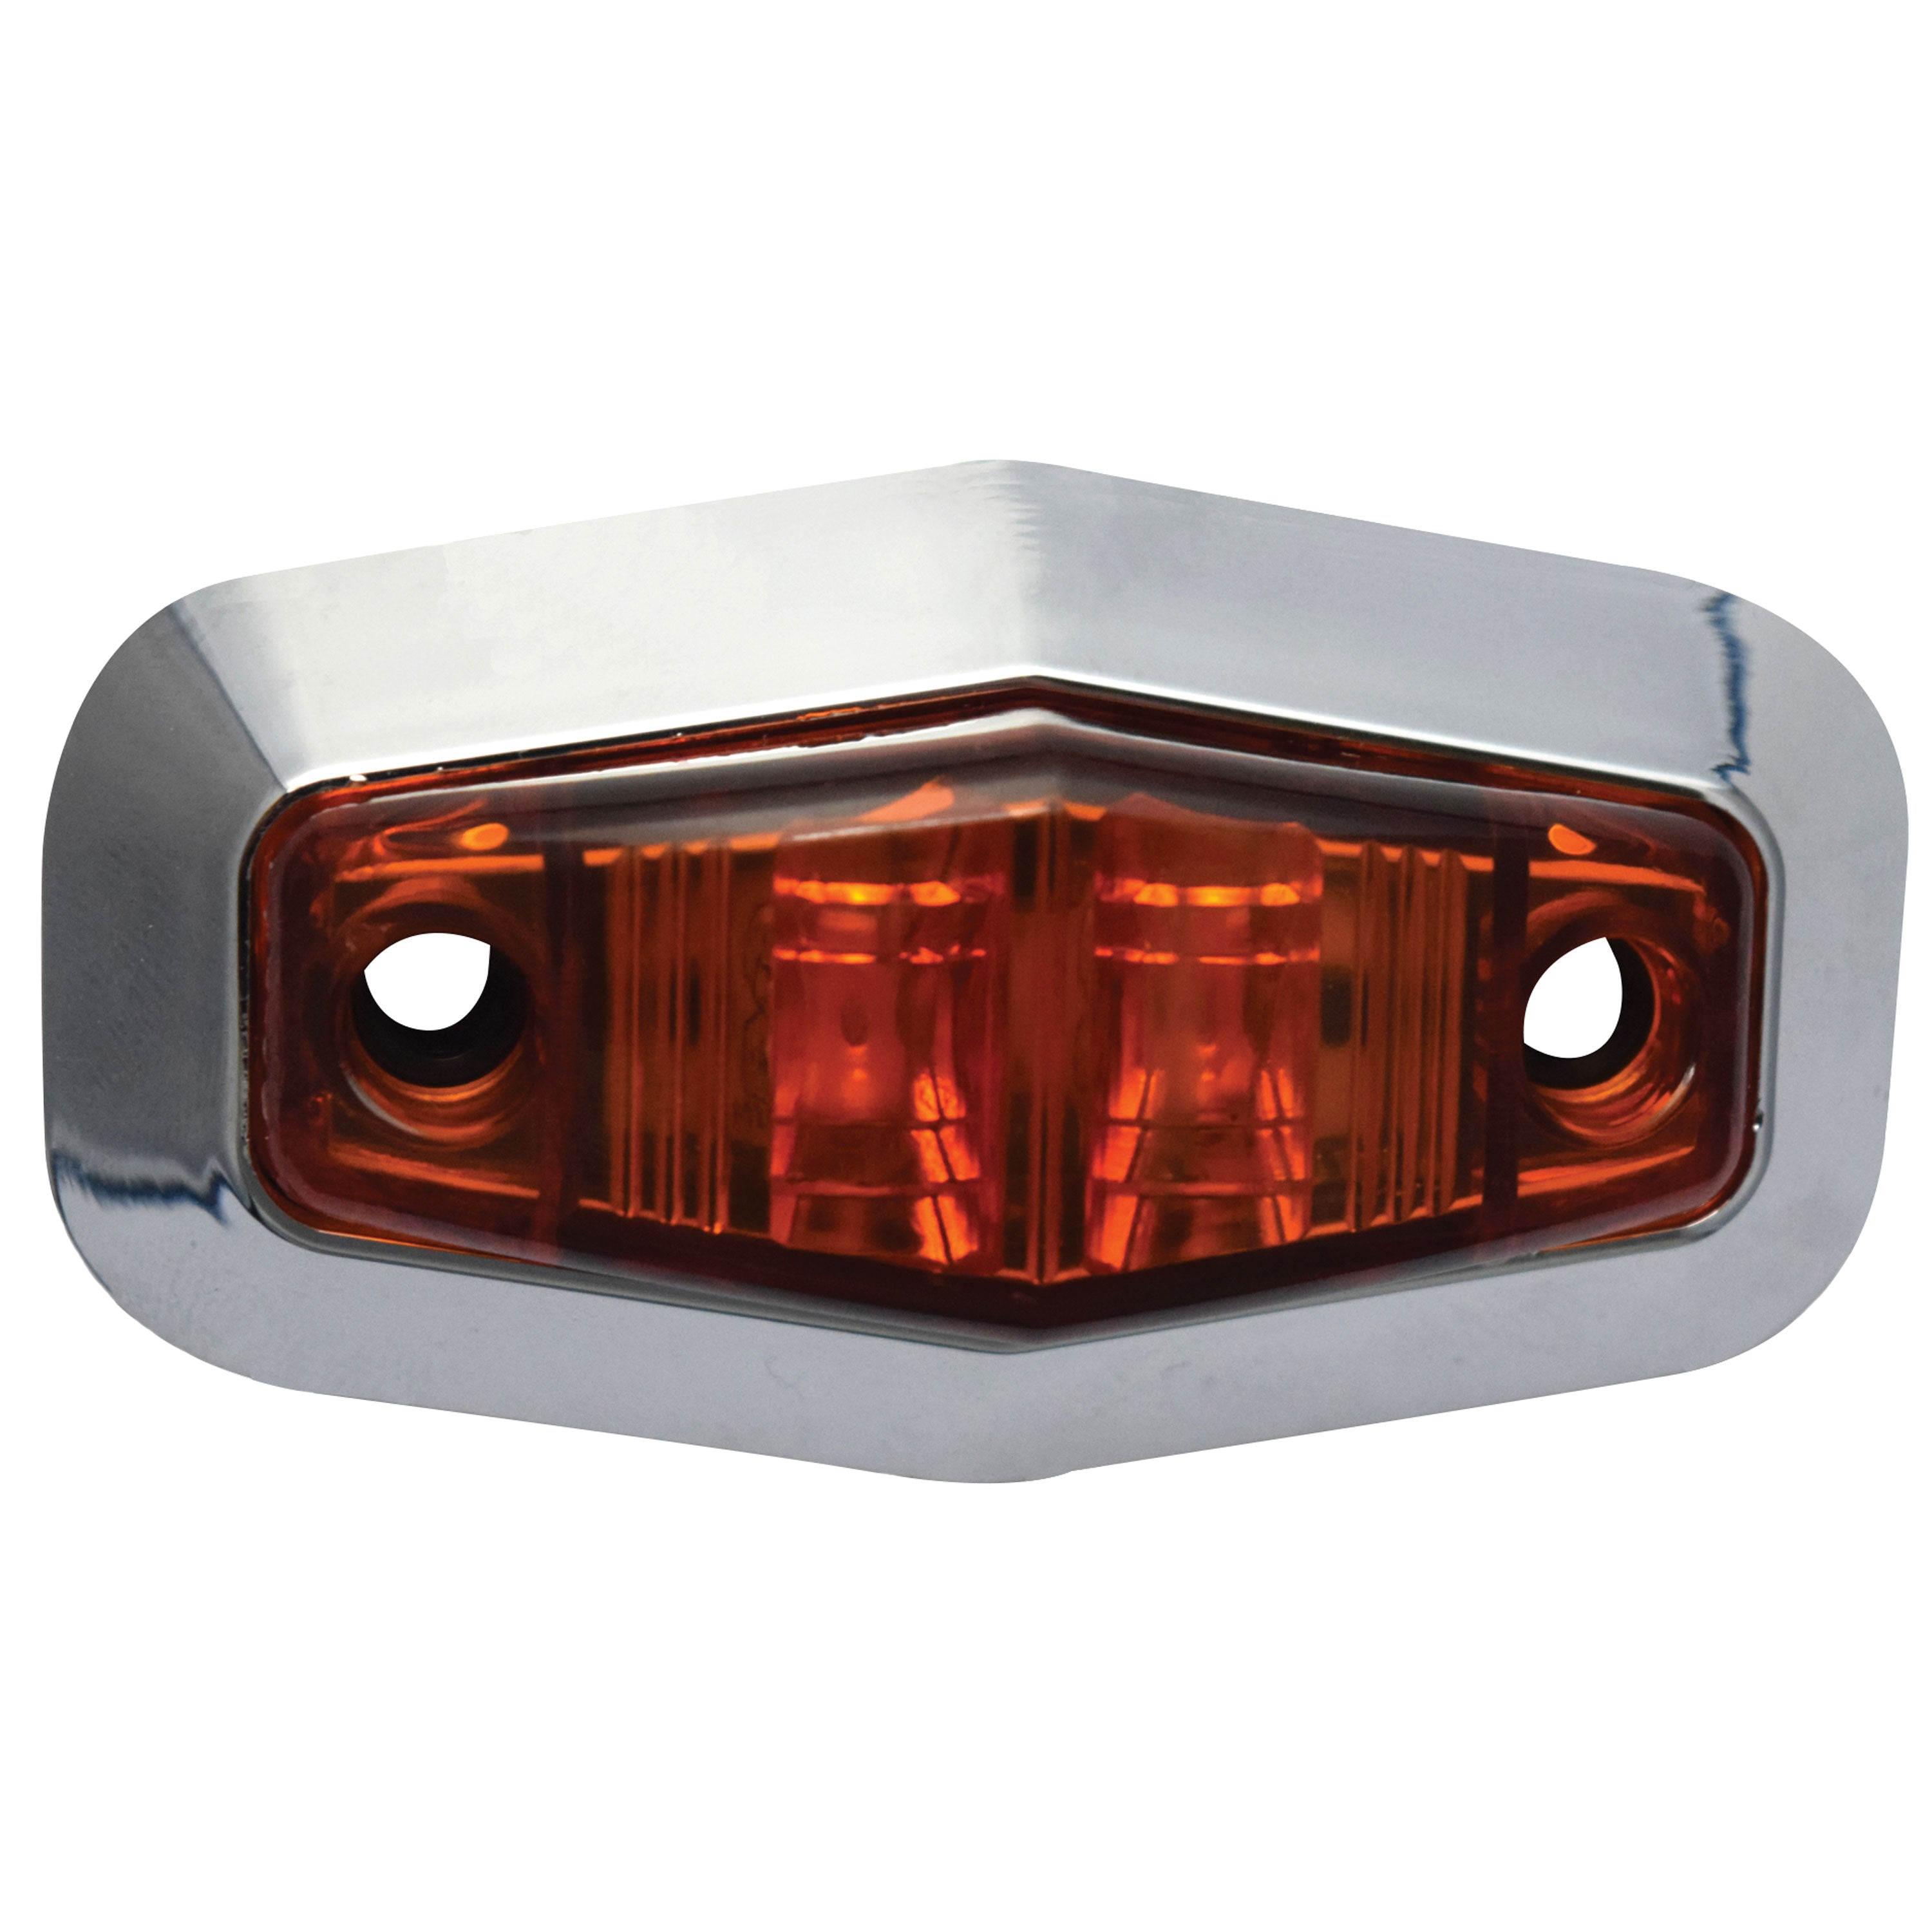 Fasteners Unlimited 003-19A LED Clearance Light Kit With Chrome Ring - Amber, 3.25 in. L x 1.75 in. H CMD-003-19A